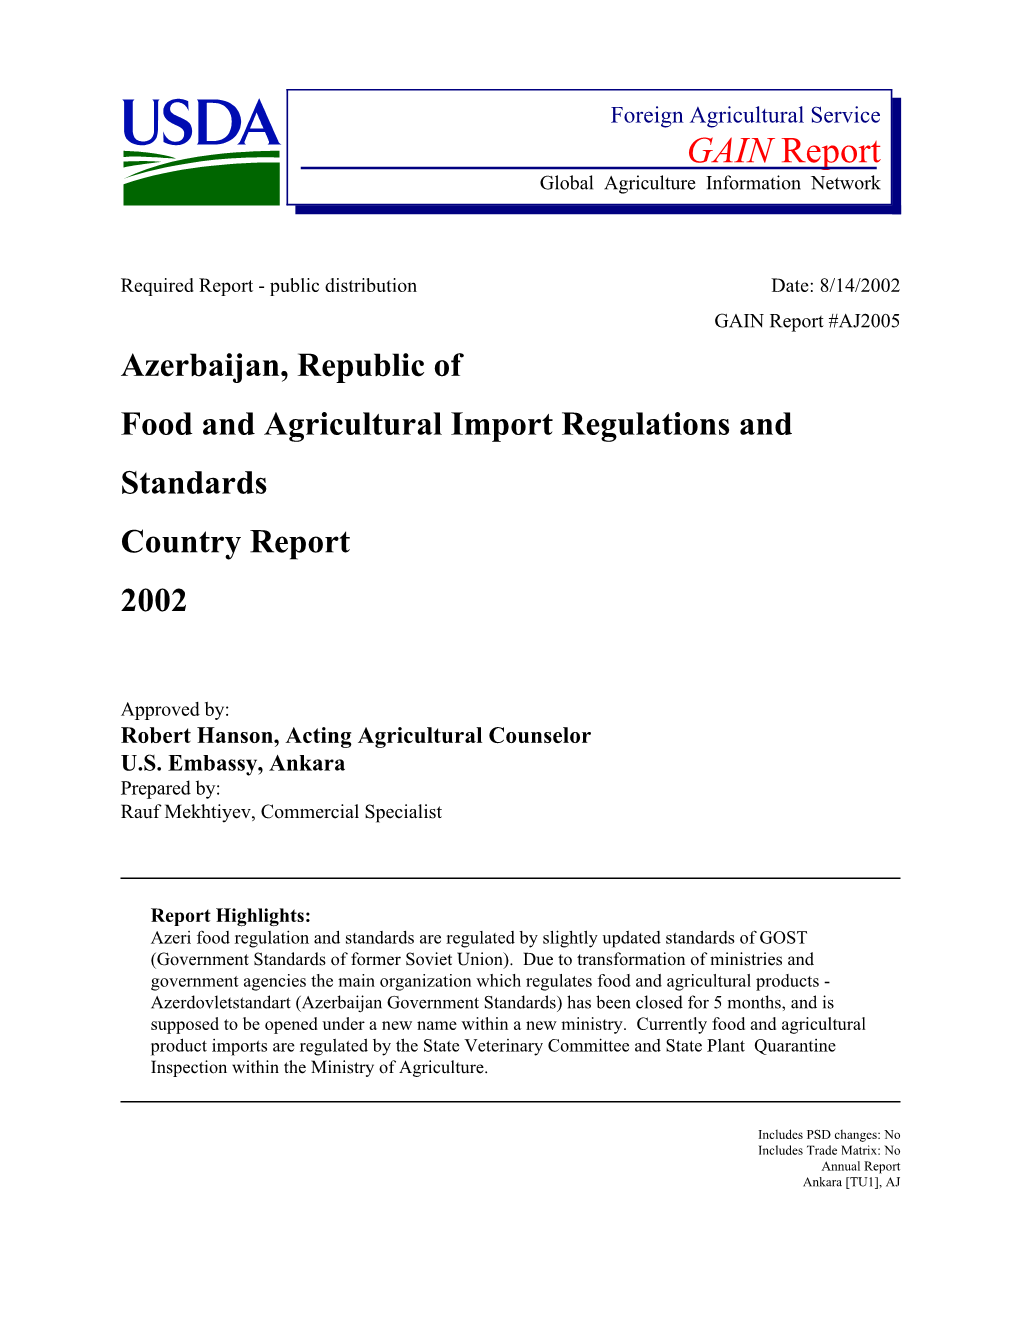 Azerbaijan, Republic of Food and Agricultural Import Regulations and Standards Country Report 2002